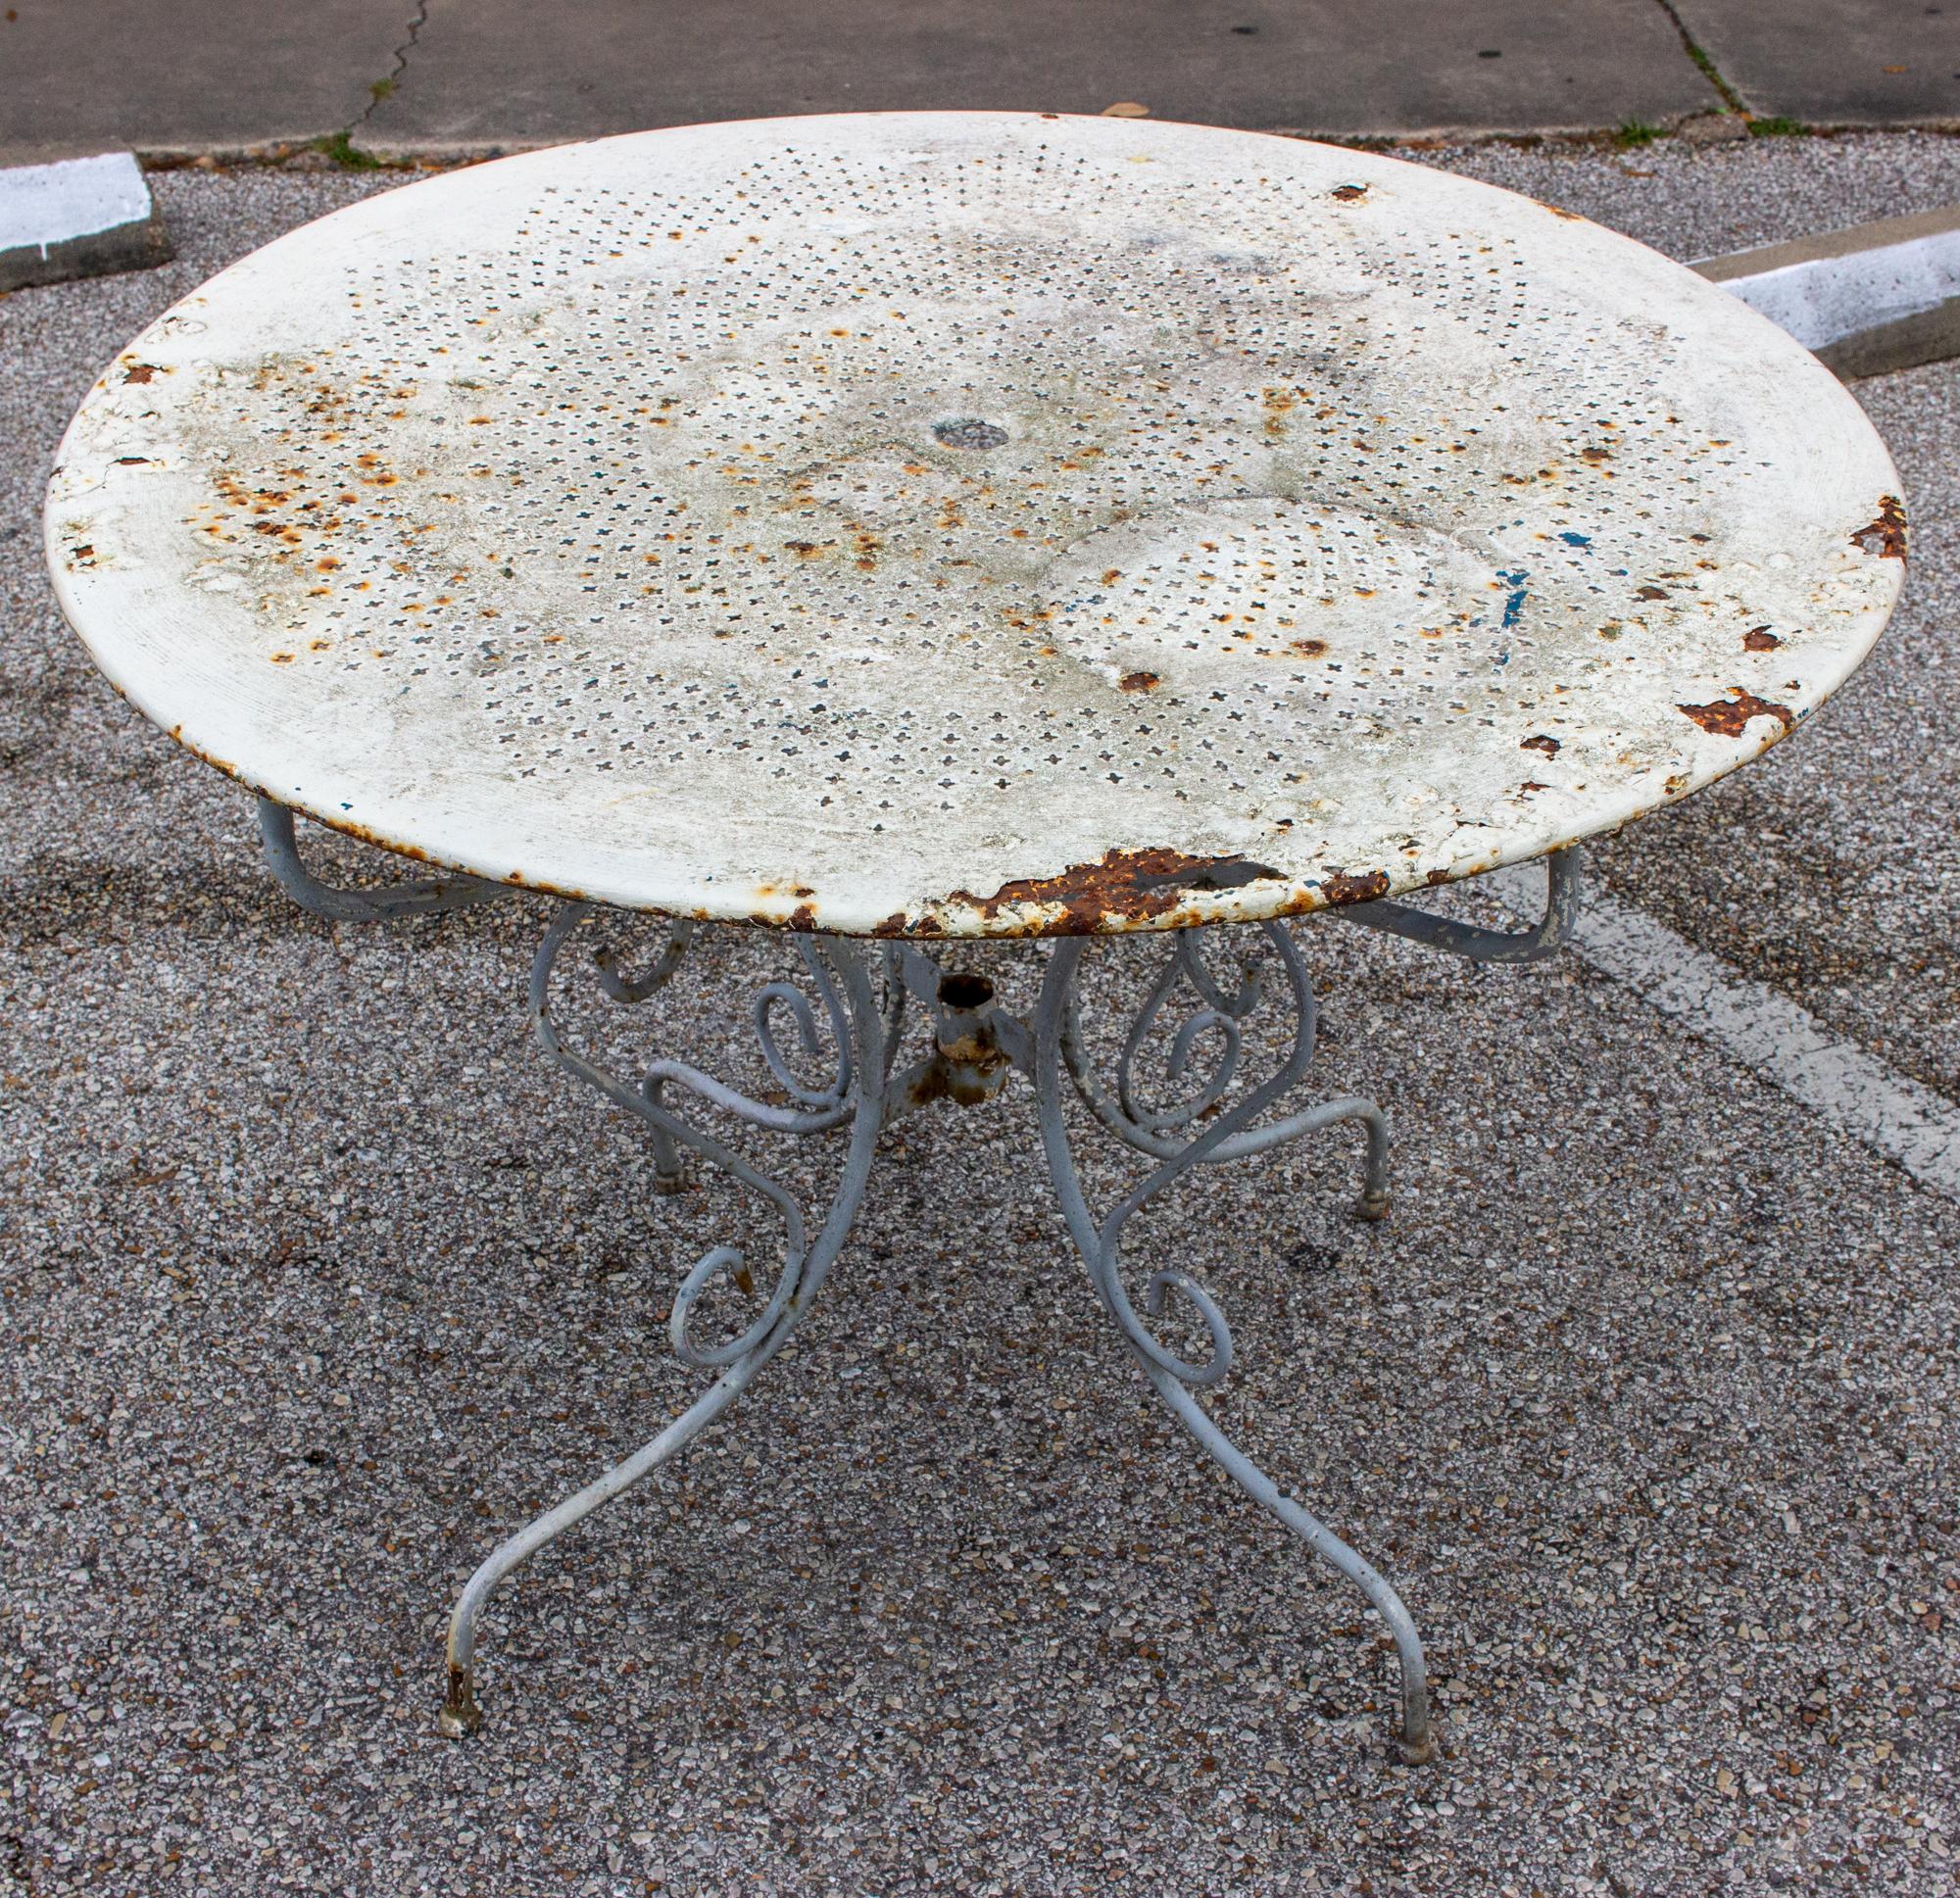 This is a rustic painted metal garden table we sourced in northern France. The base is painted a pale gray color with some white and blue paint peeking through (likely from previous paint jobs). The top is painted in white. The center of the top